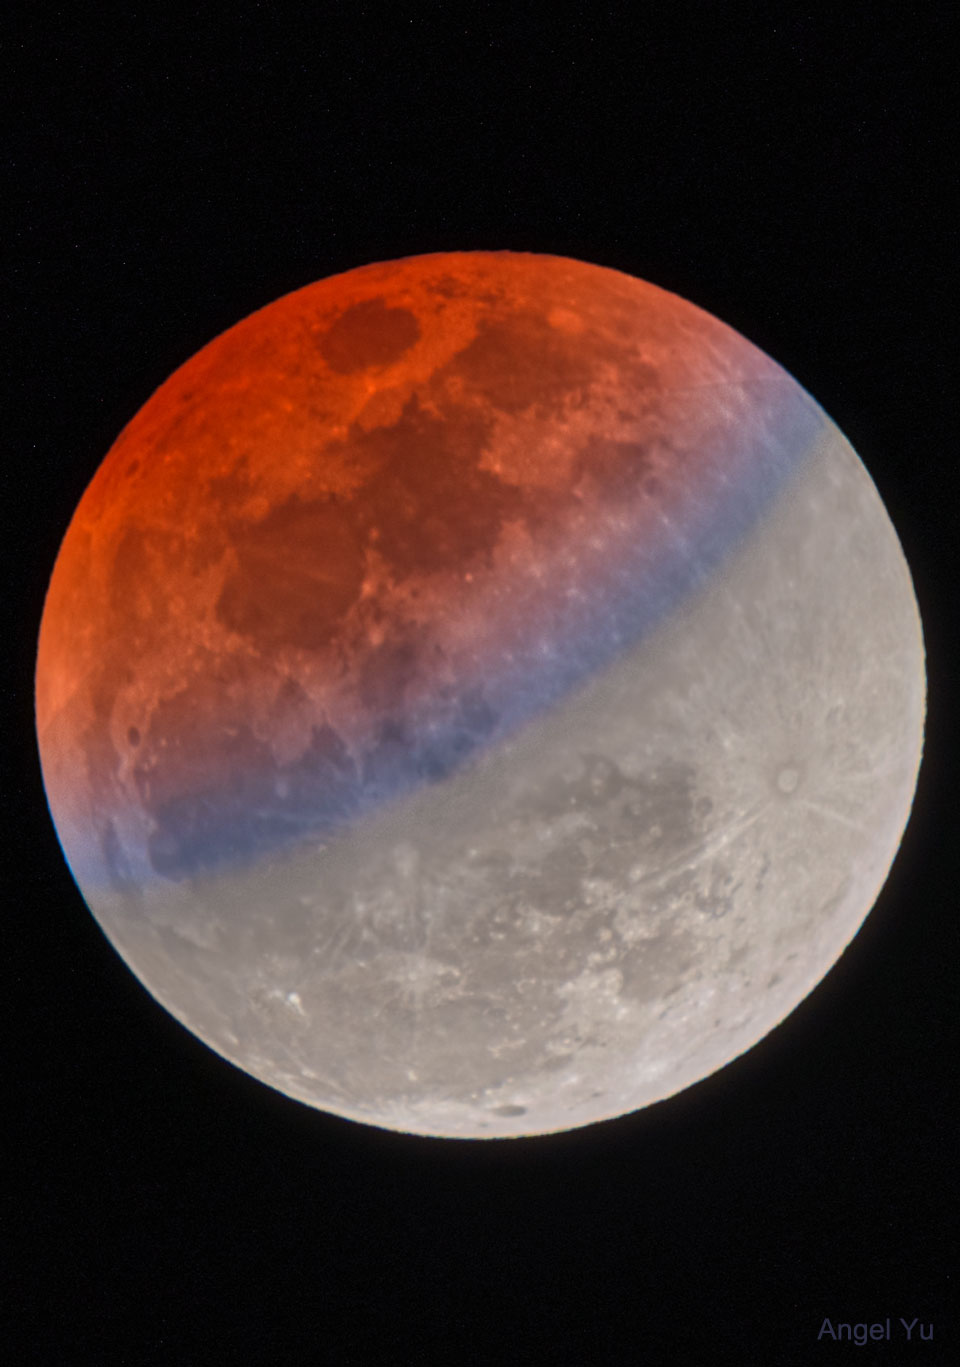 The featured image shows the recent partial
eclipse of the Moon with the eclipsed part appearing
red and a blue band due to refraction of sunlight
through the Earth's atmosphere.
Please see the explanation for more detailed information.